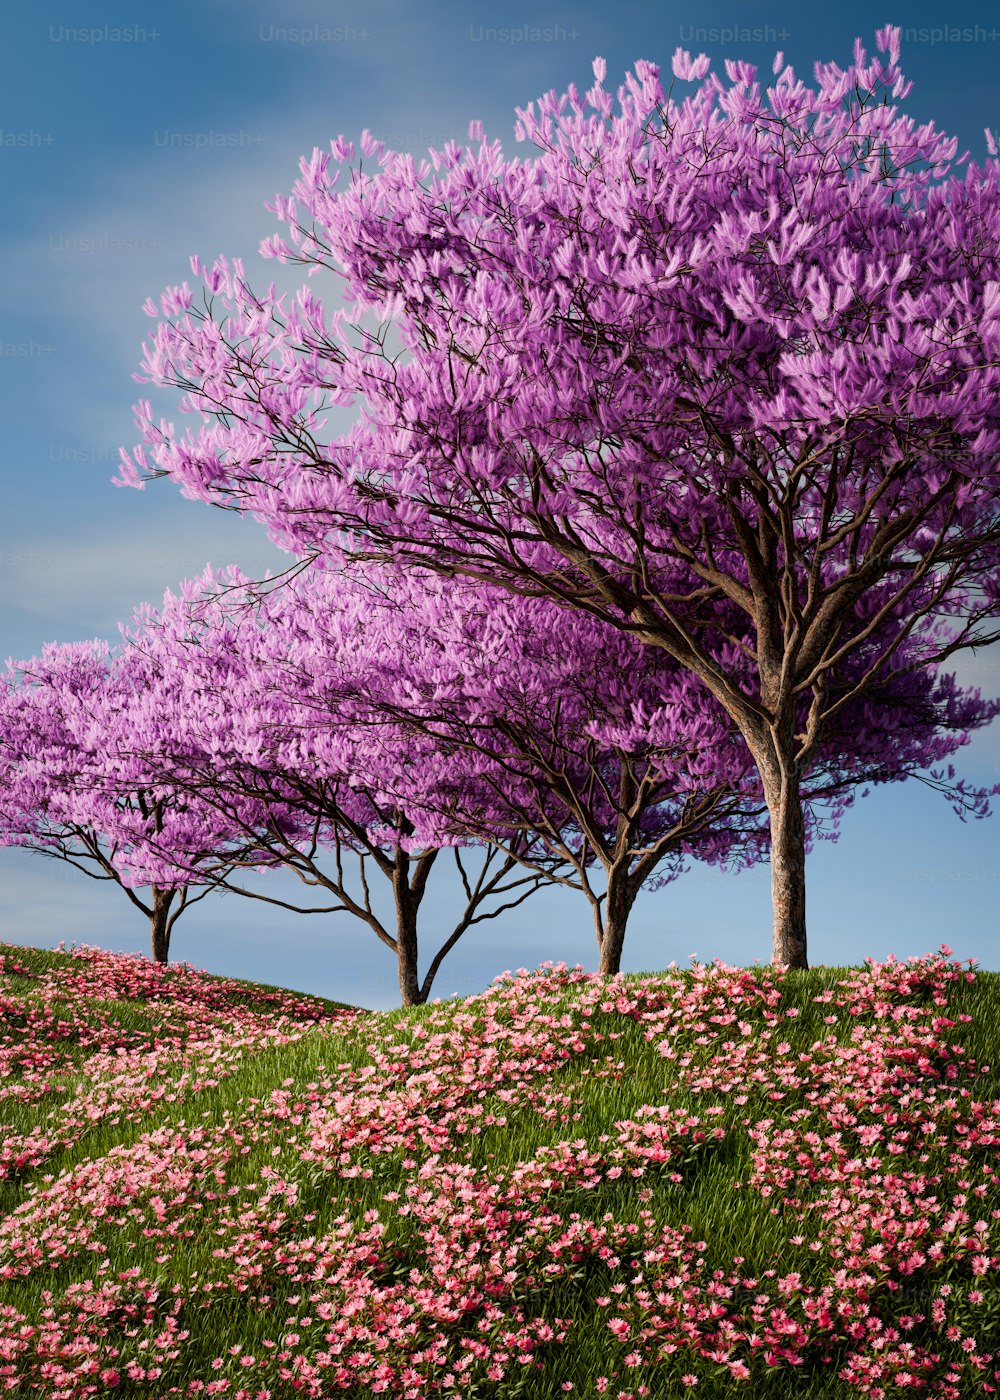 a group of trees with purple flowers in the foreground